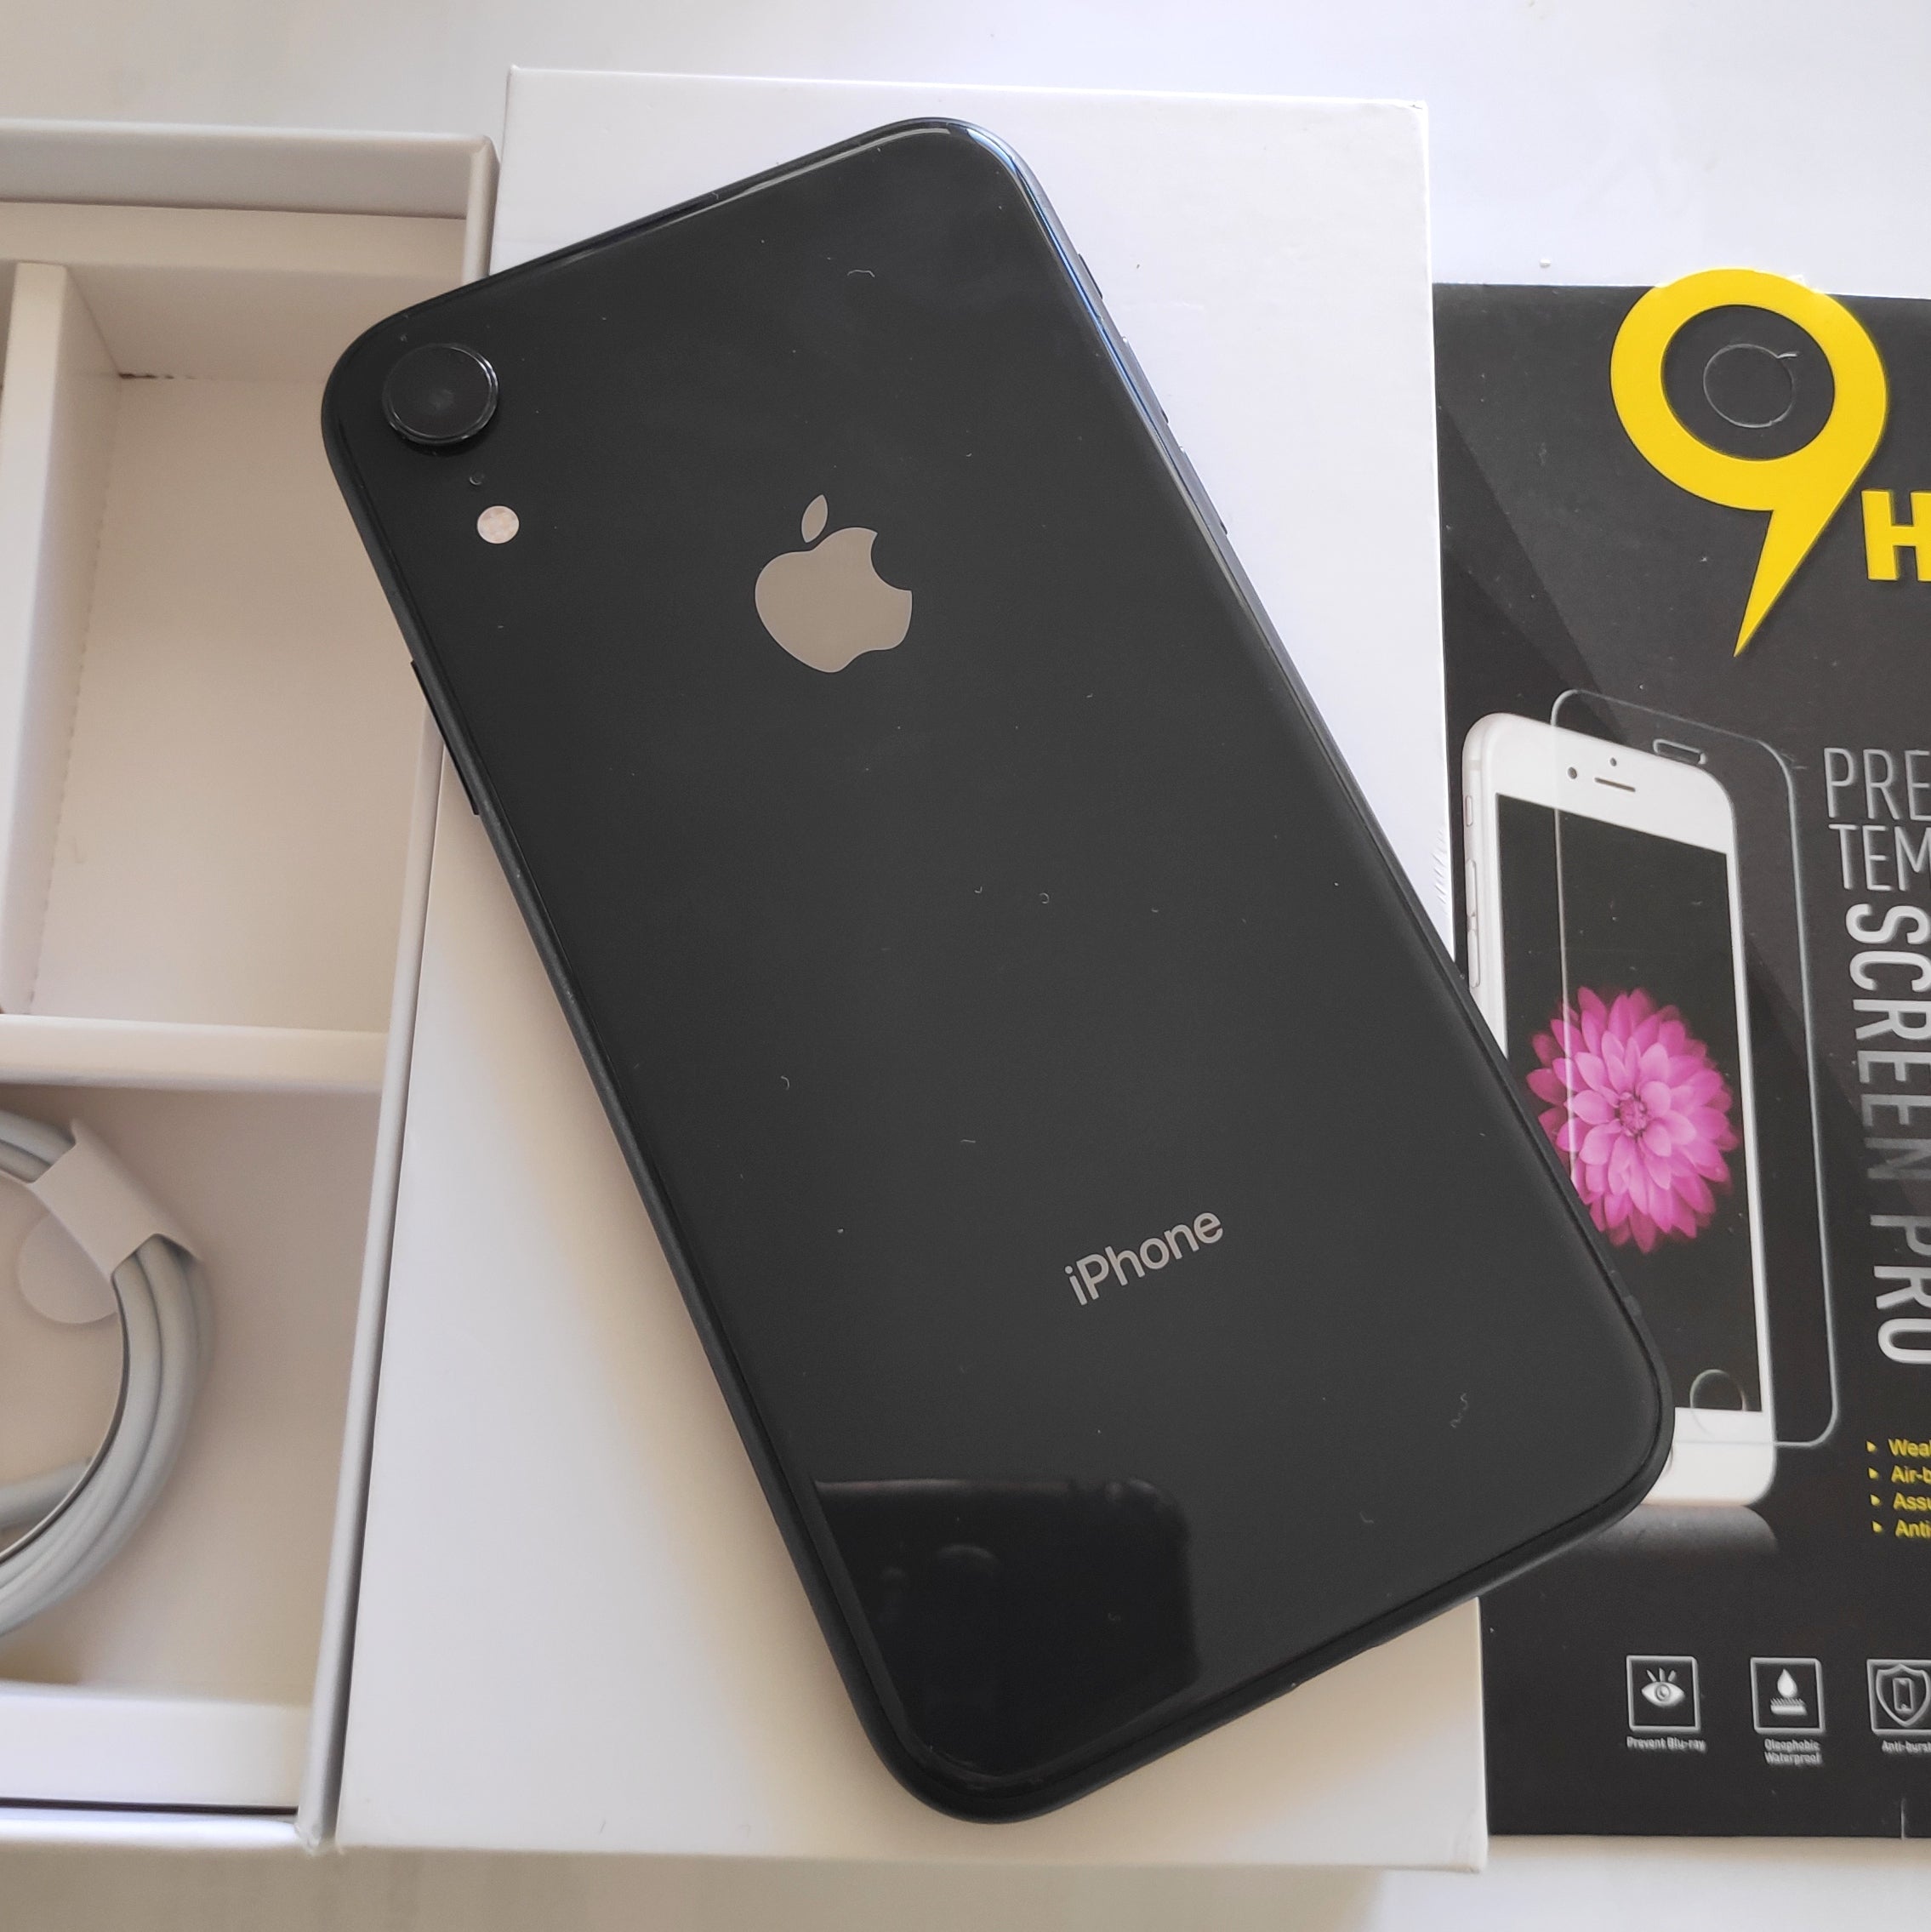 Apple iPhone XR 128GB Black New Case, Glass Screen Protector & Shipping (Back glass broken)